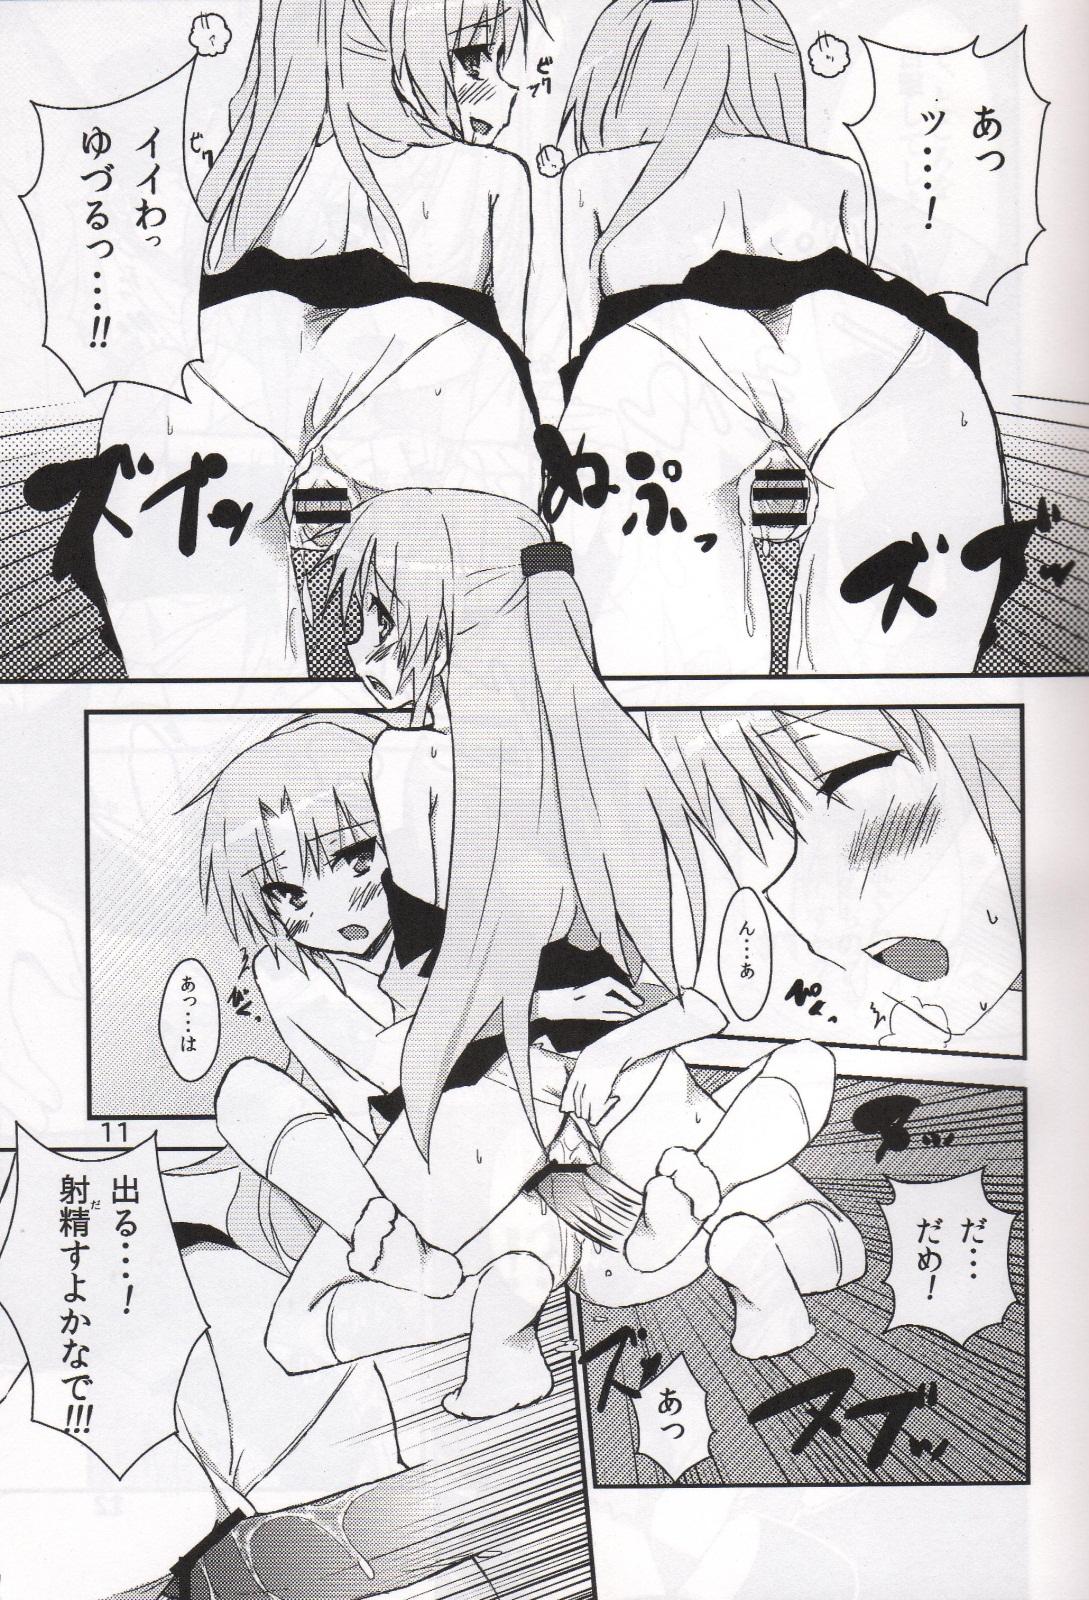 Passivo My Heart is yours! ver.2♪ - Angel beats Exhib - Page 10